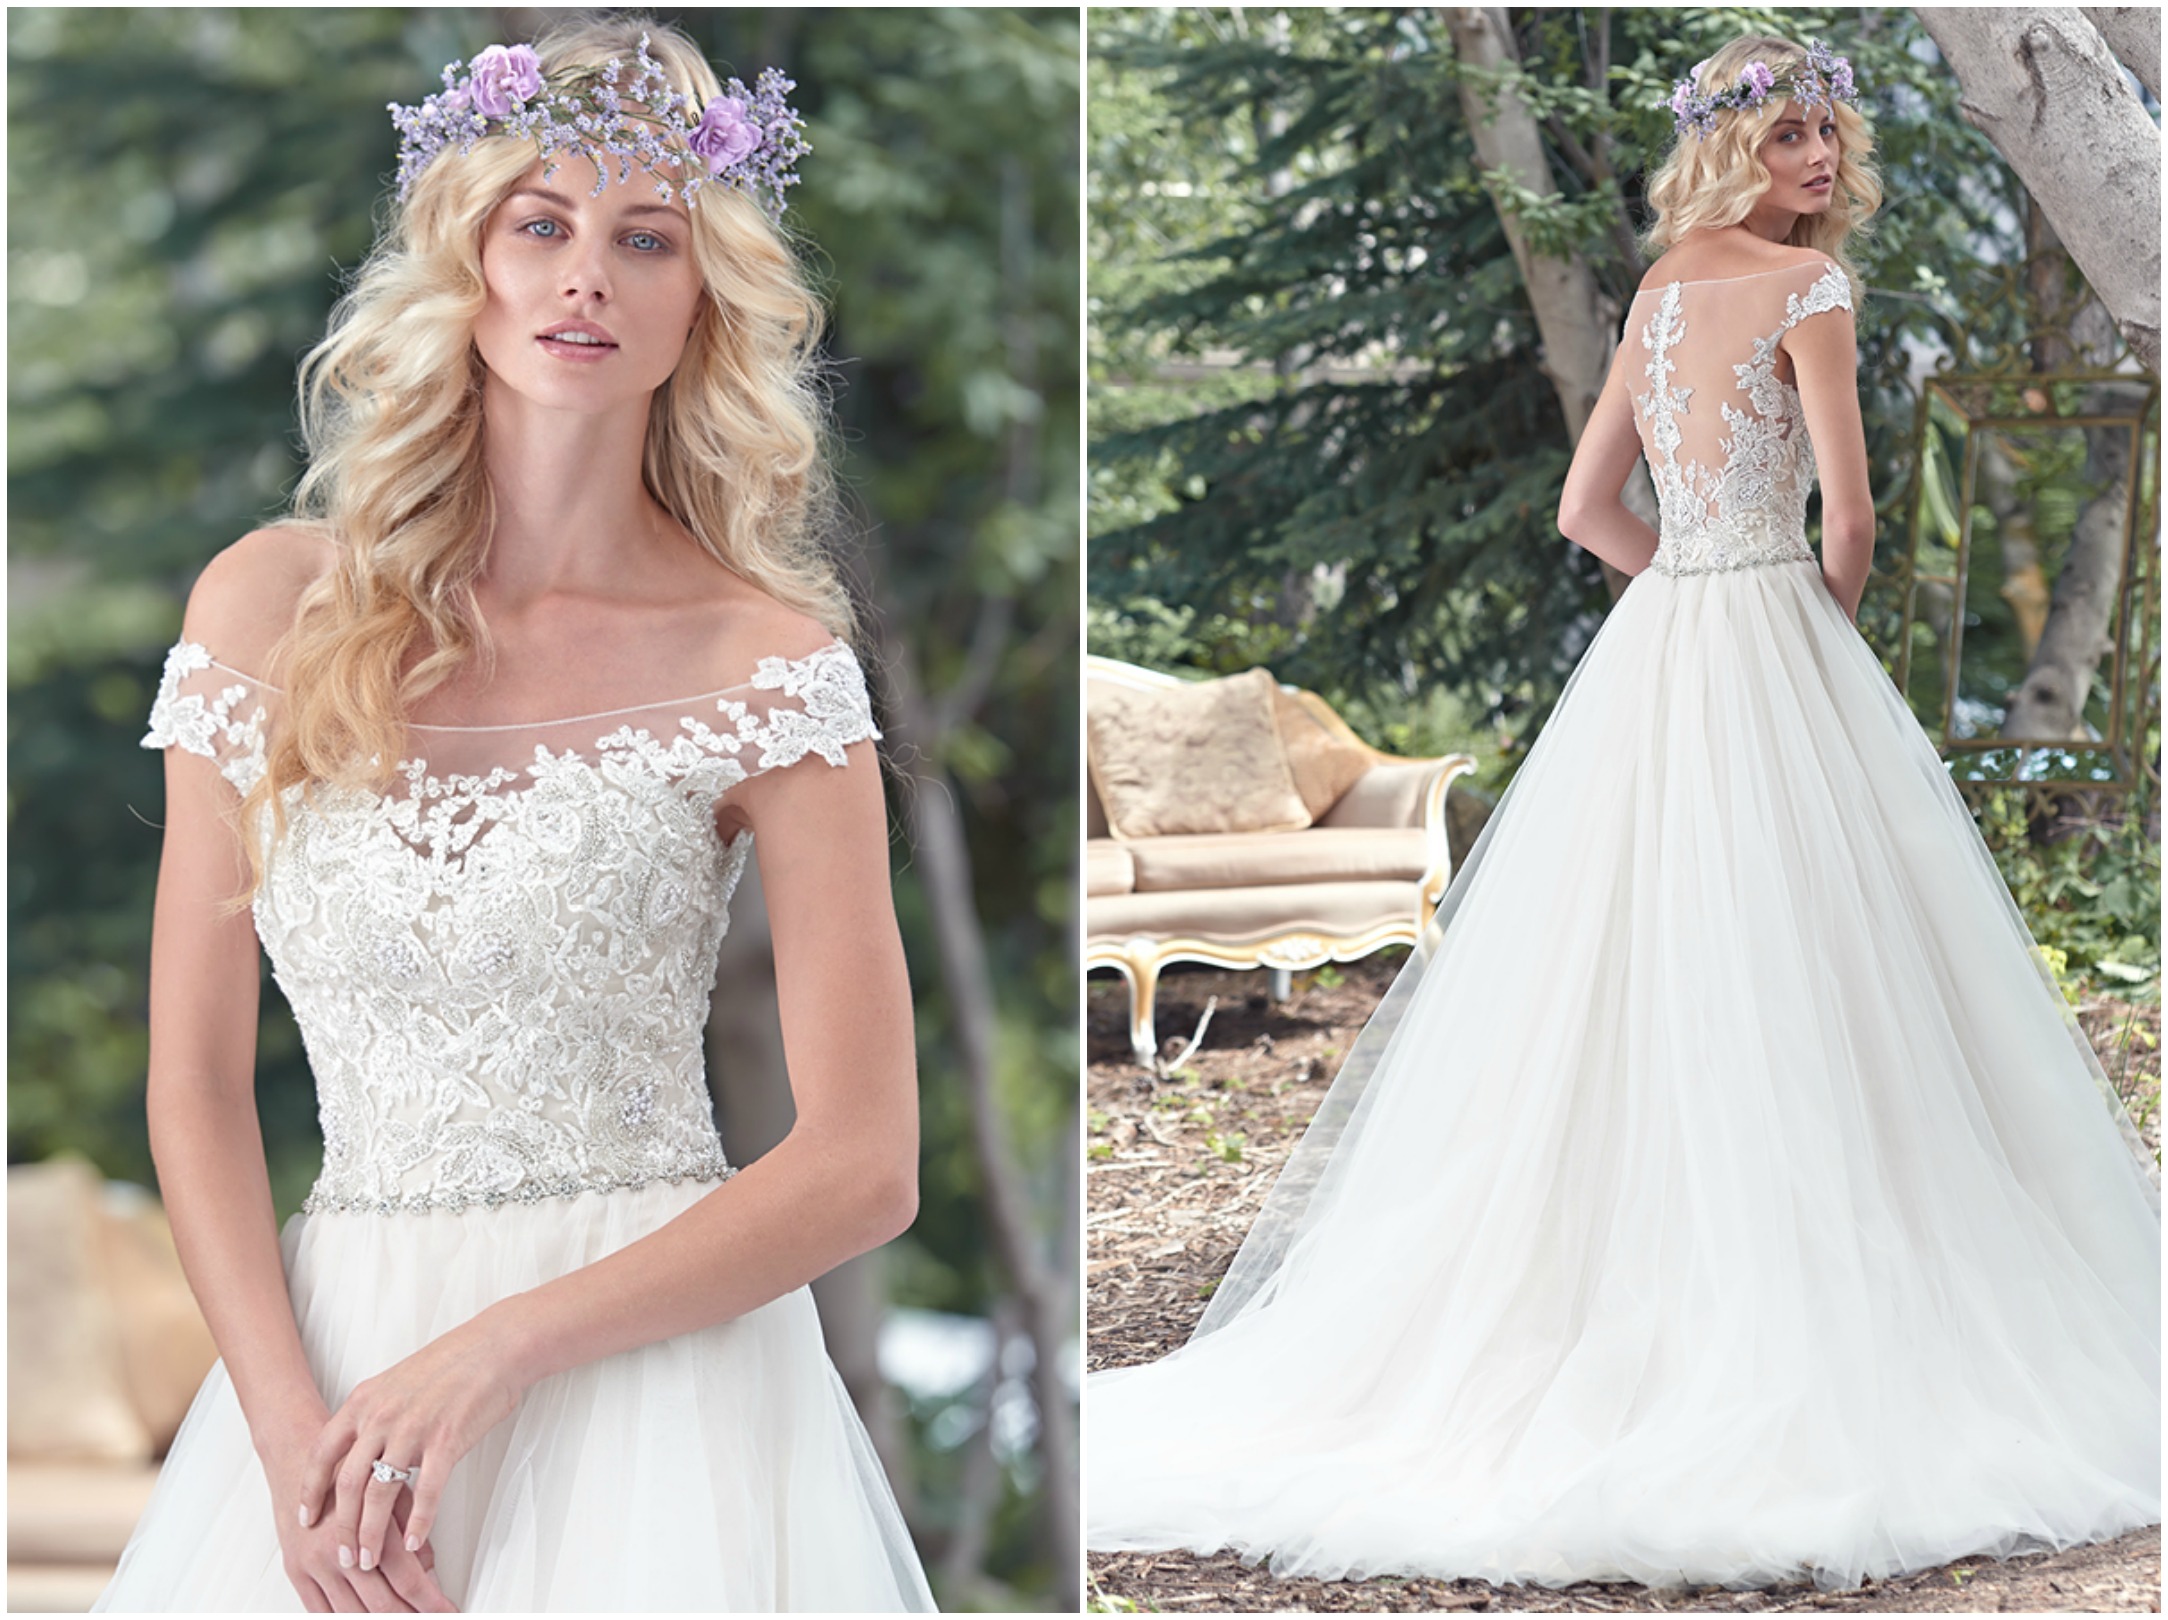 <a href="http://www.maggiesottero.com/maggie-sottero/montgomery/9492" target="_blank">Maggie Sottero Spring 2016</a>